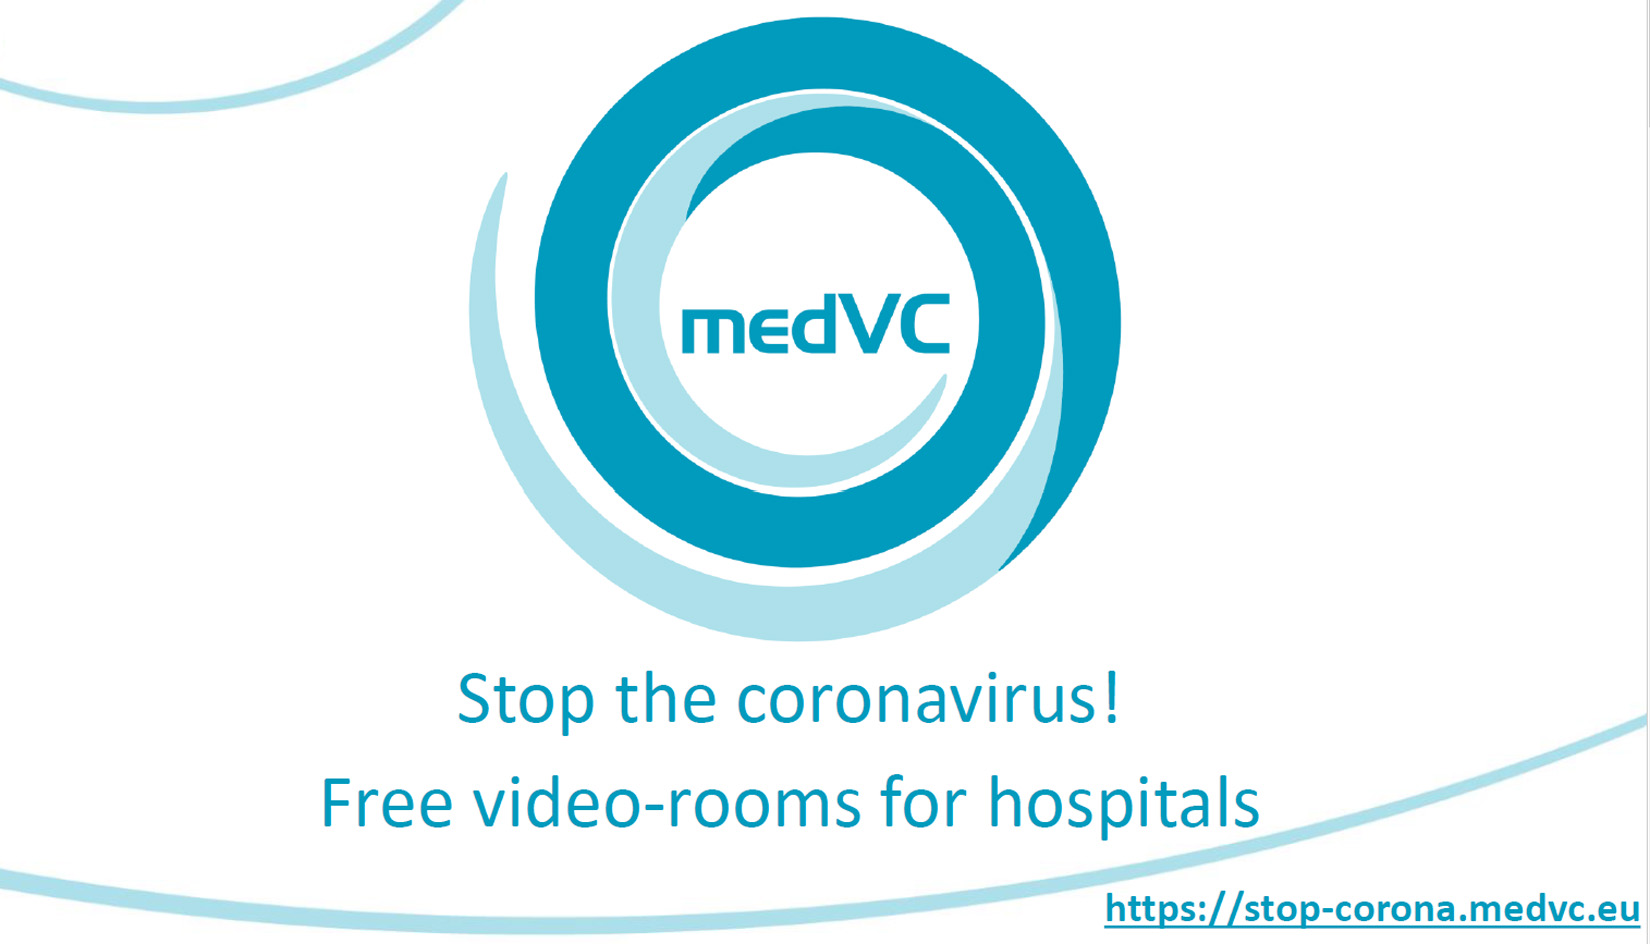 Stop Corona – free video-rooms for hospitals